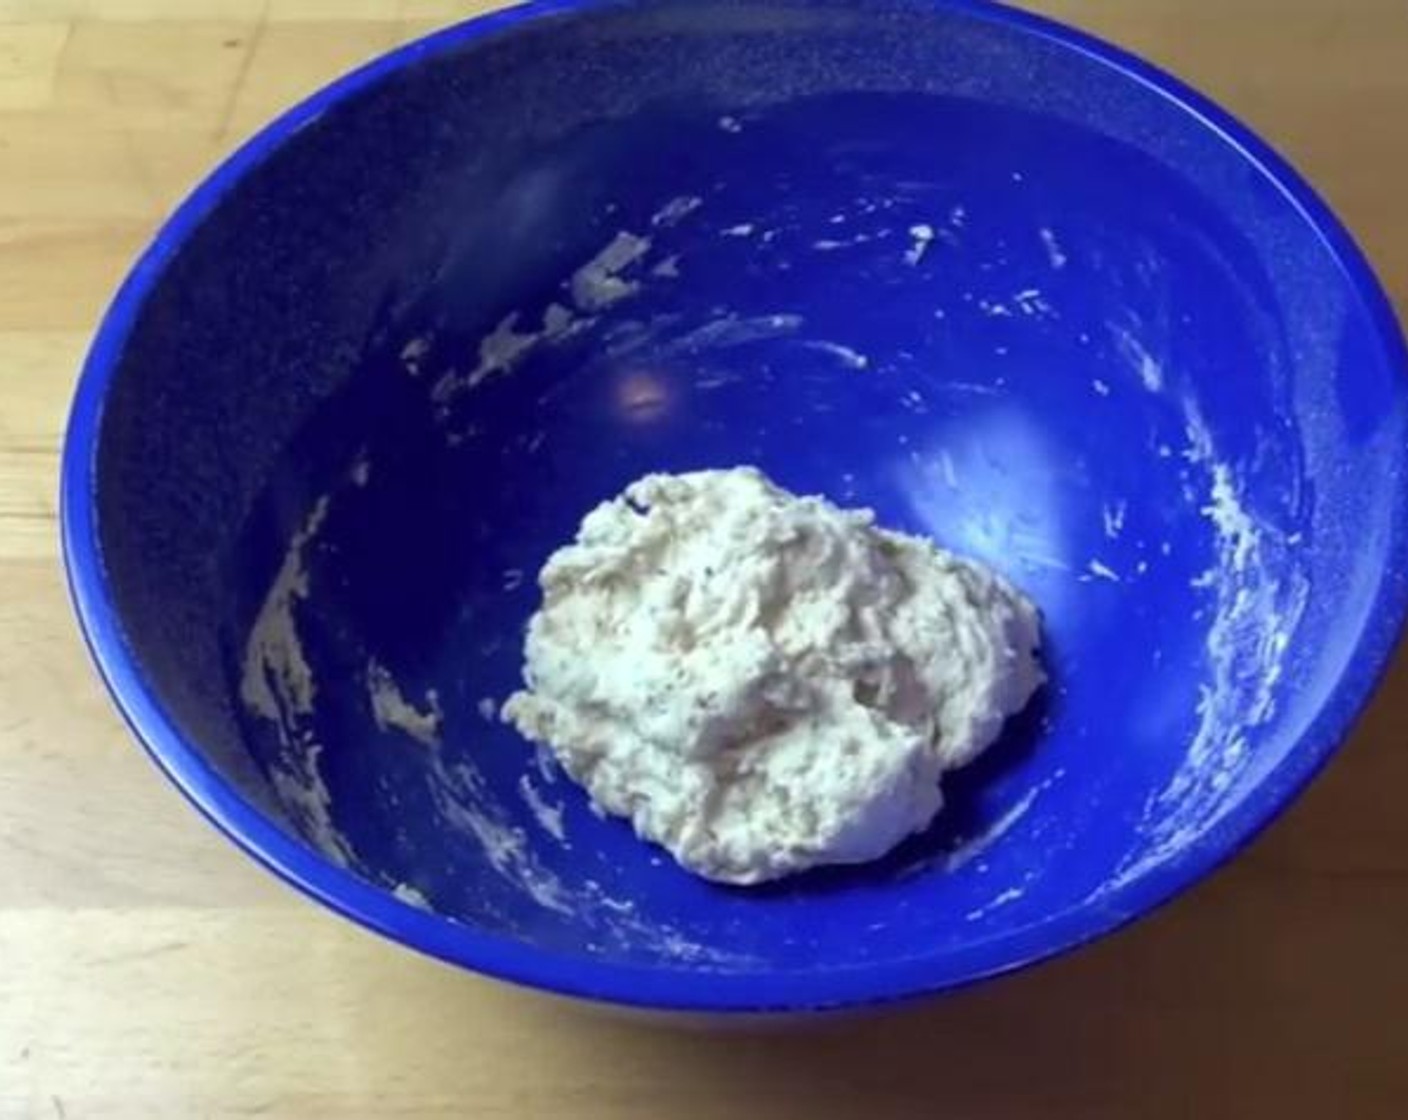 step 3 On a mixing bowl, mix together sift the All-Purpose Flour (1 cup). Add Dried Mixed Herbs (1/2 Tbsp) together with the yeast mixture. Mix together until you get a nice sticky dough.